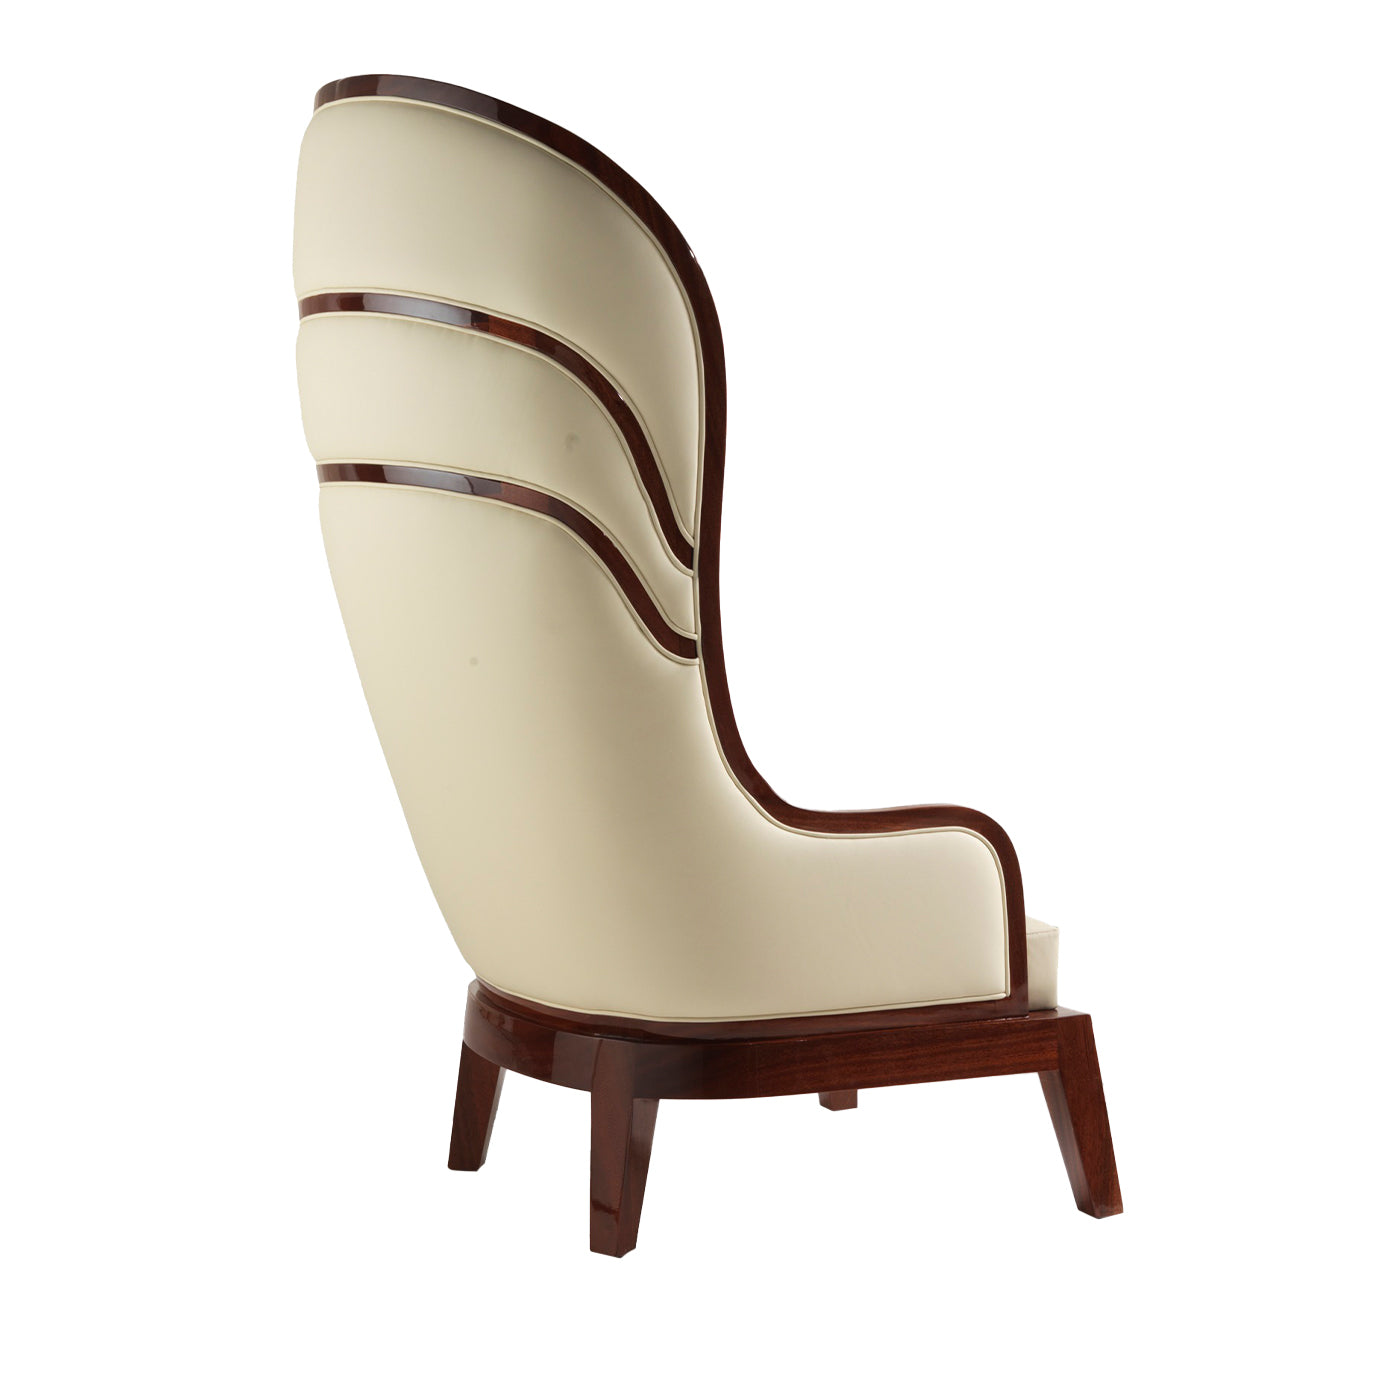 Duchesse of Home White Armchair by Archer Humphryes Architects #2 - Main view